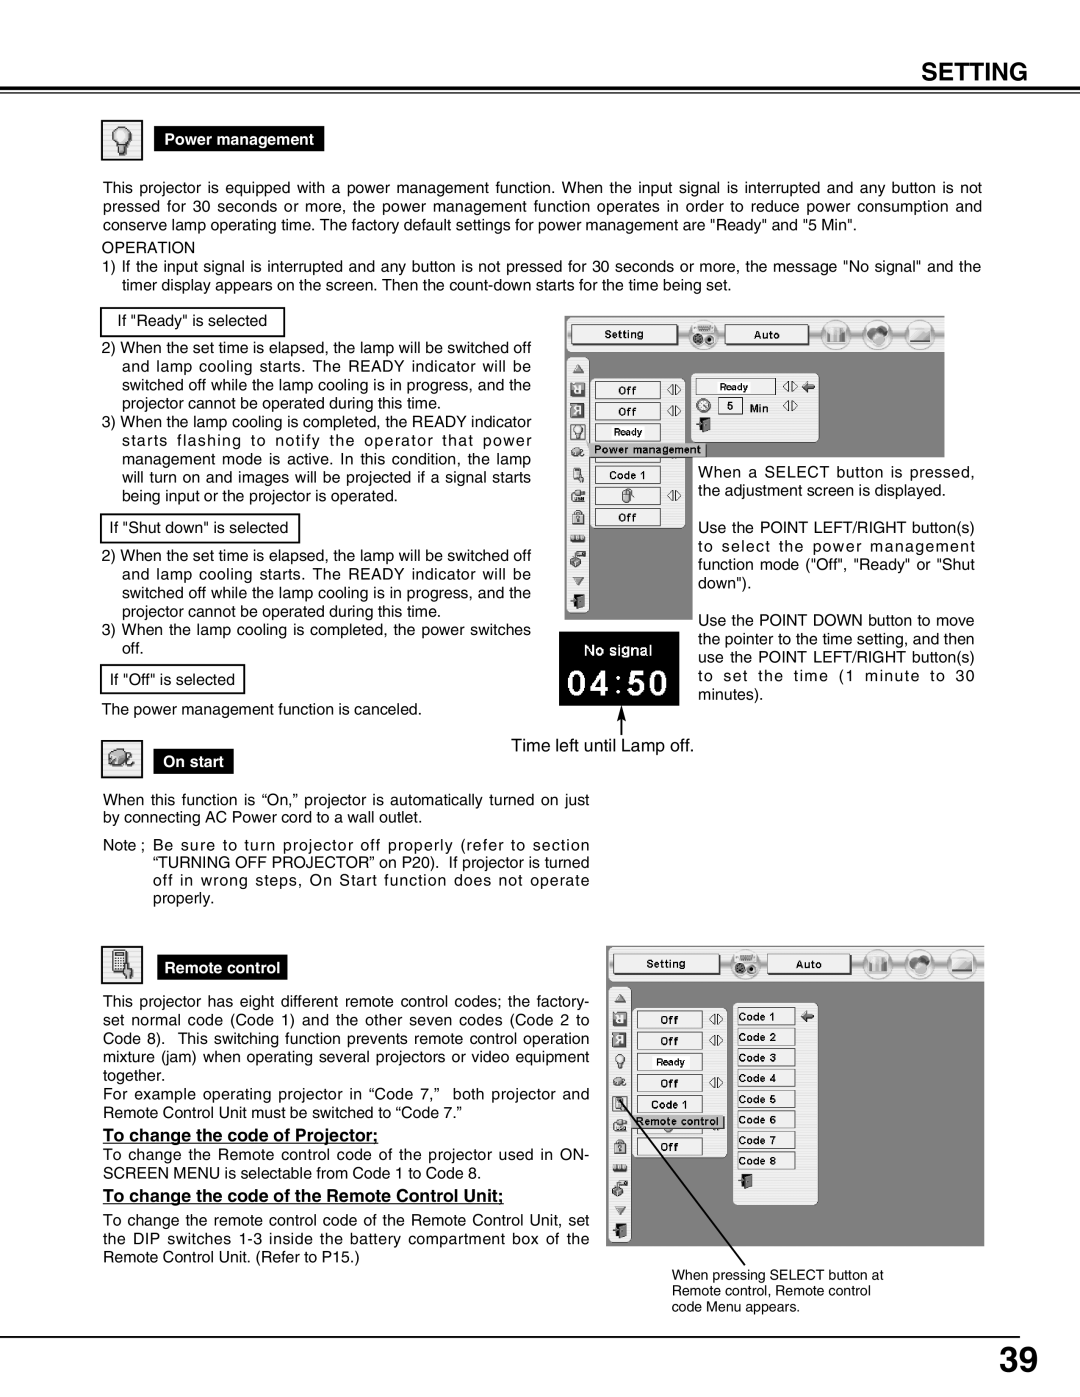 Eiki LC-X70 instruction manual Setting, Time left until Lamp off, To change the code of Projector 